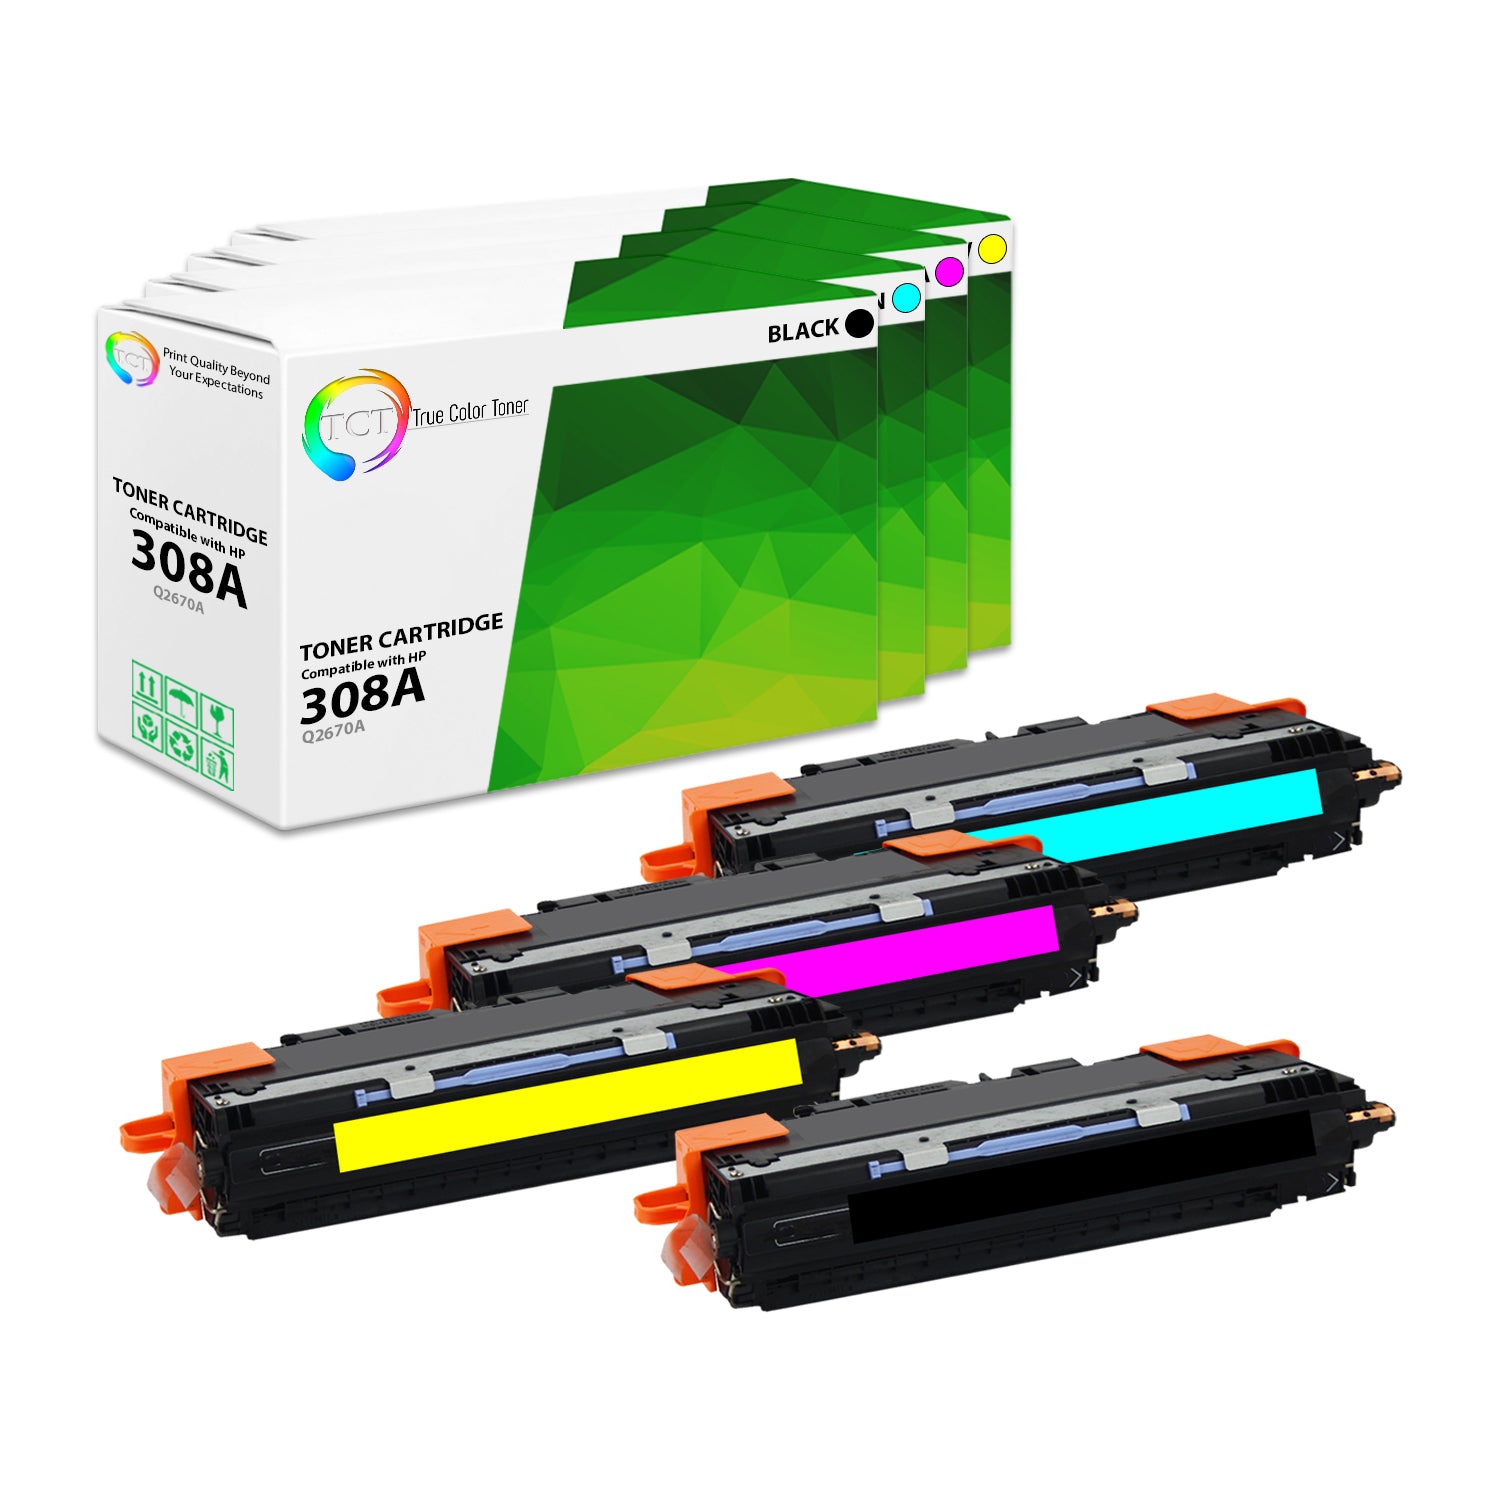 TCT Compatible Toner Cartridge Replacement for the HP 308A 309A Series - 4 Pack (BK, C, M, Y)